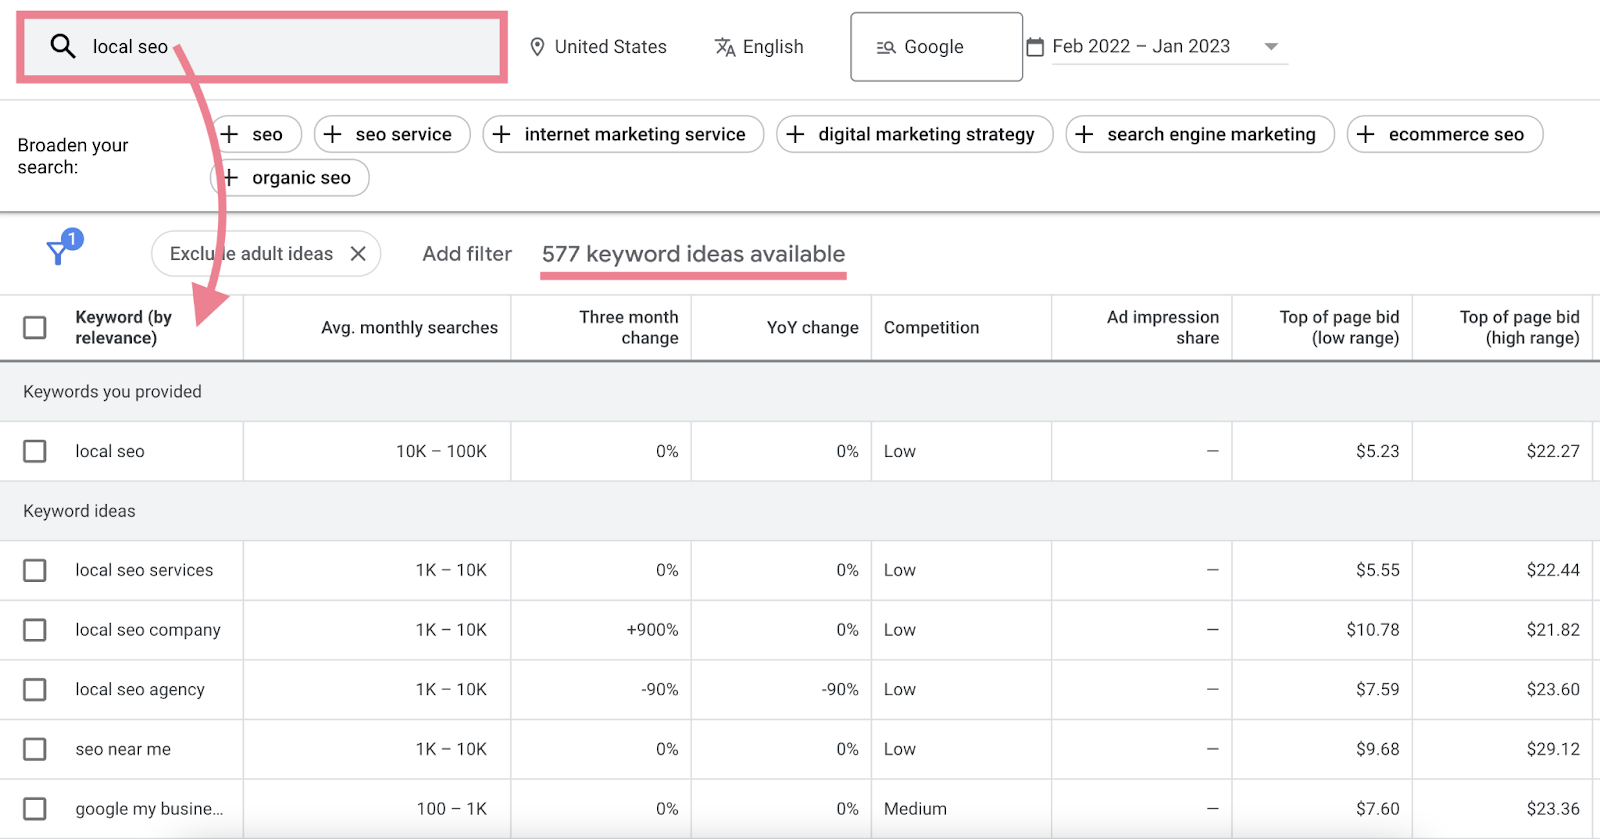 keyword ideas related to "local seo" in Google Keyword Planner